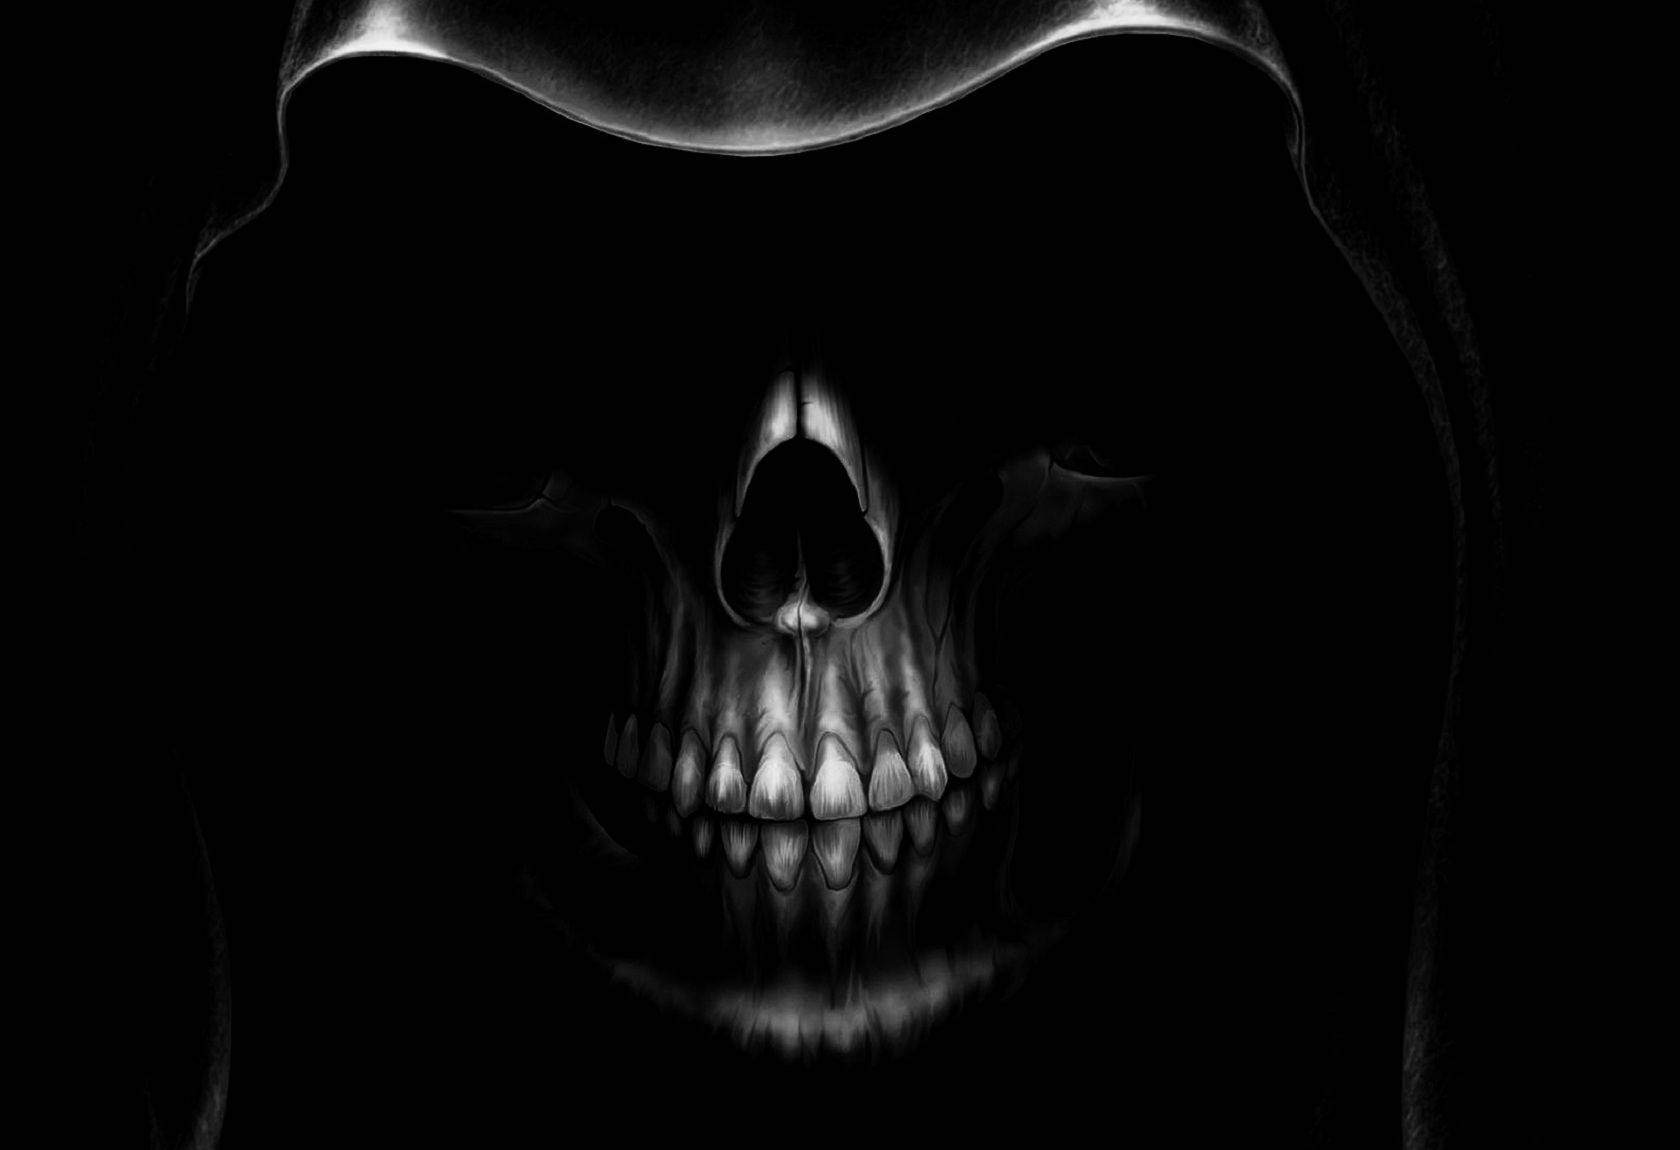 Free Death Wallpaper Downloads, [100+] Death Wallpapers for FREE |  